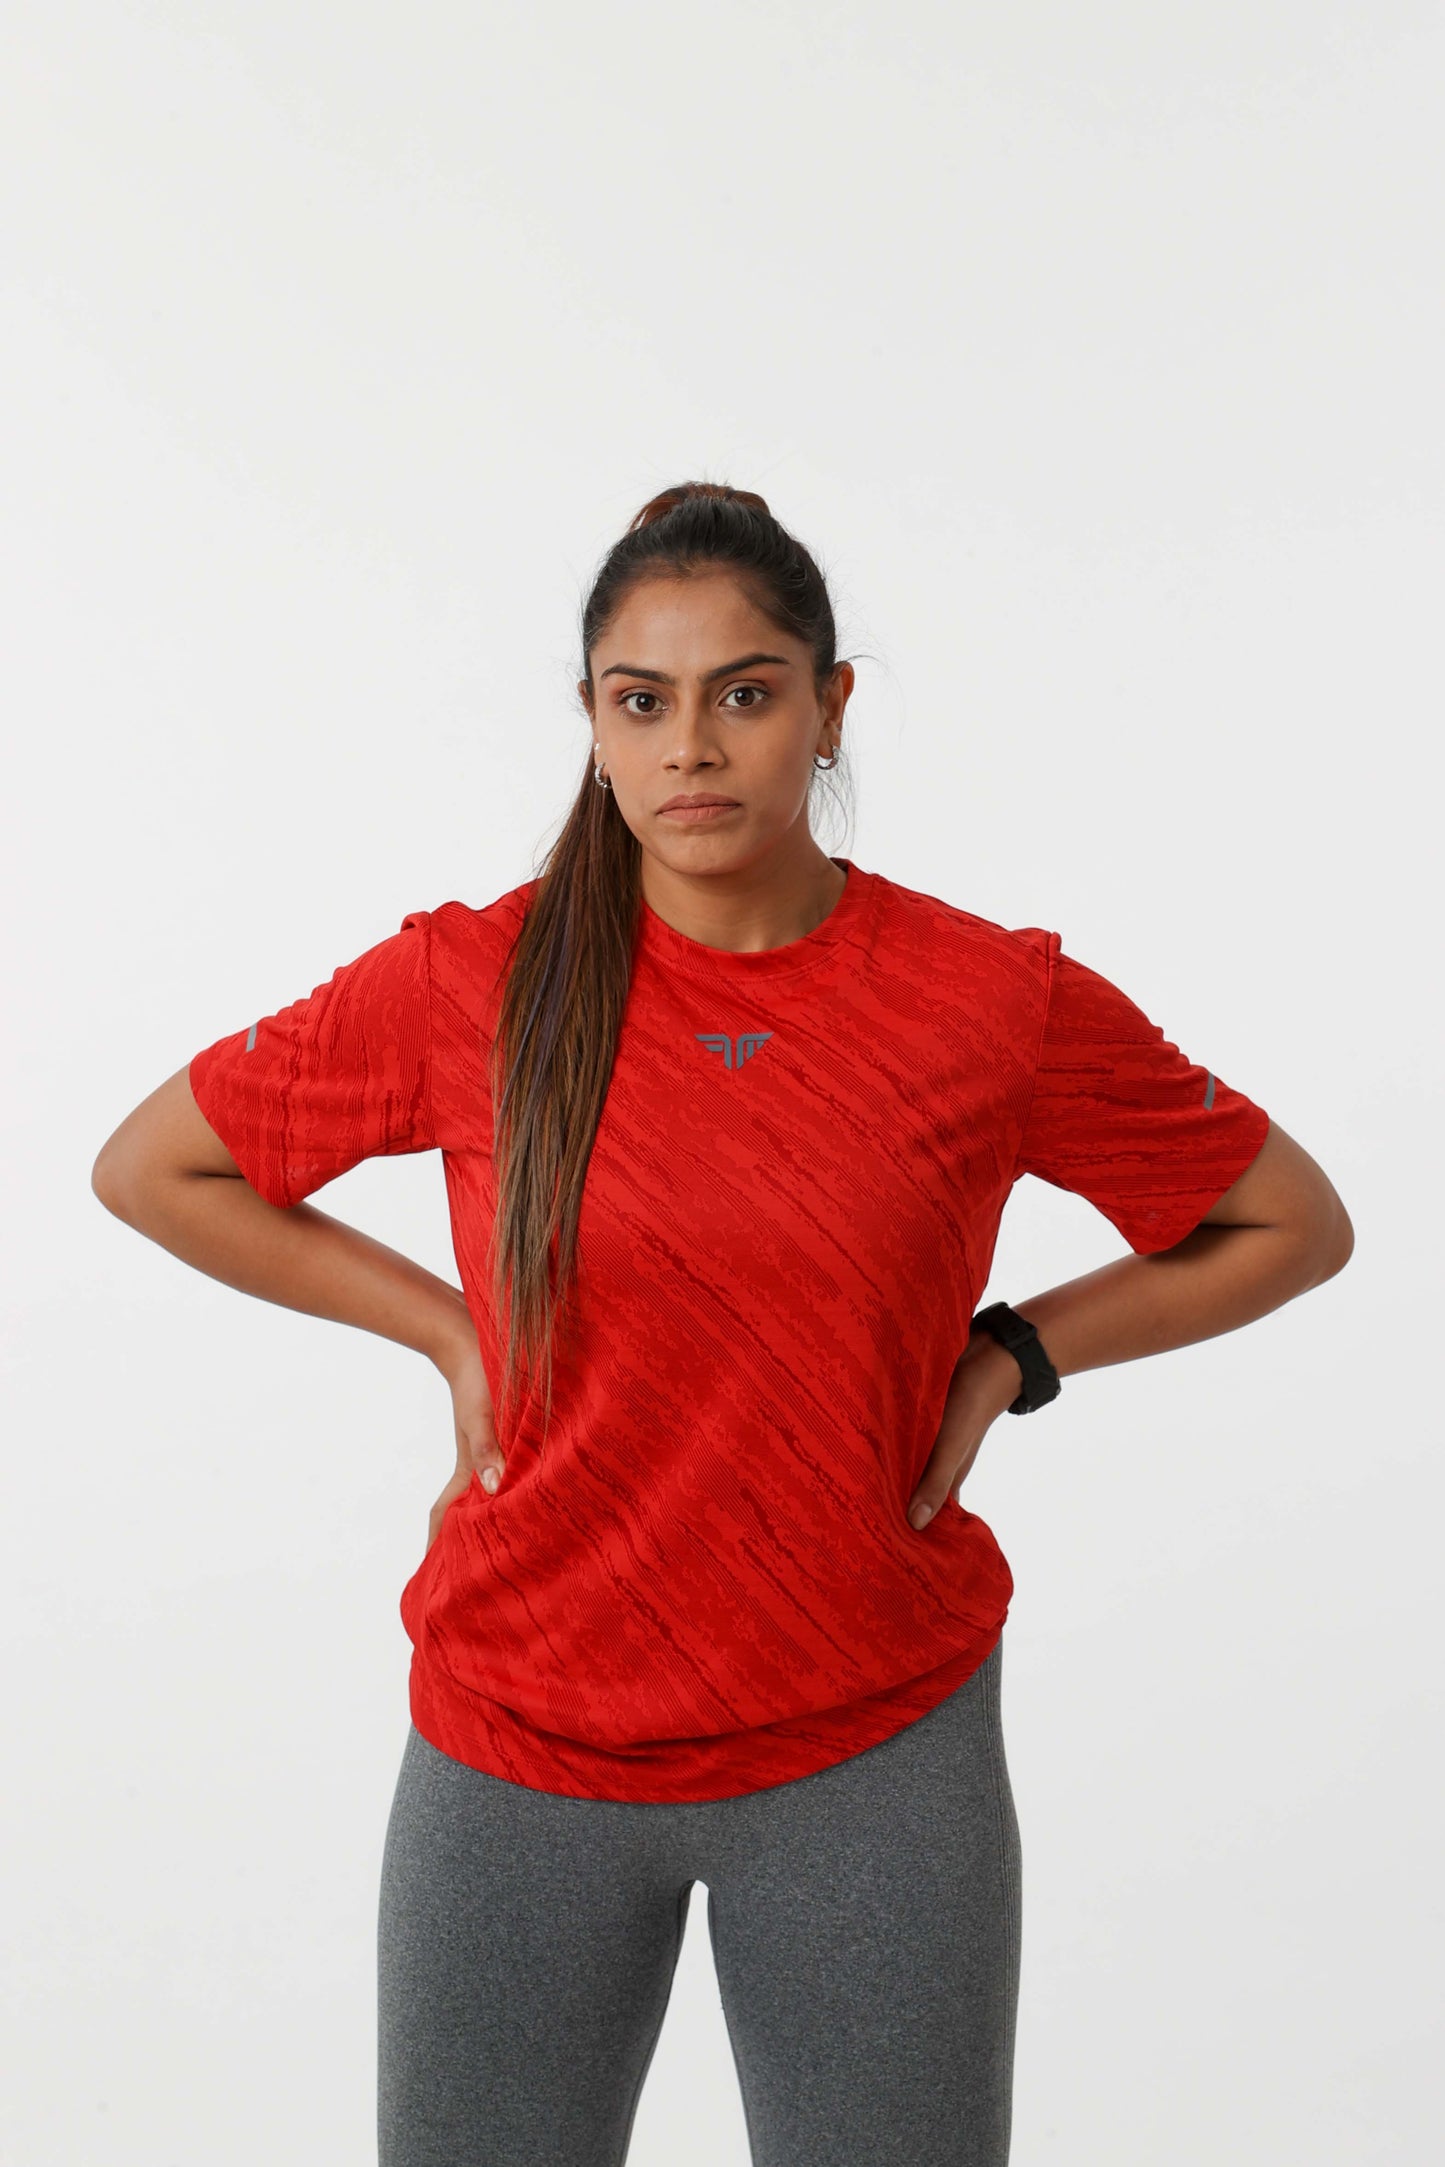 Women's Thunder Workout/Training Tee - Red